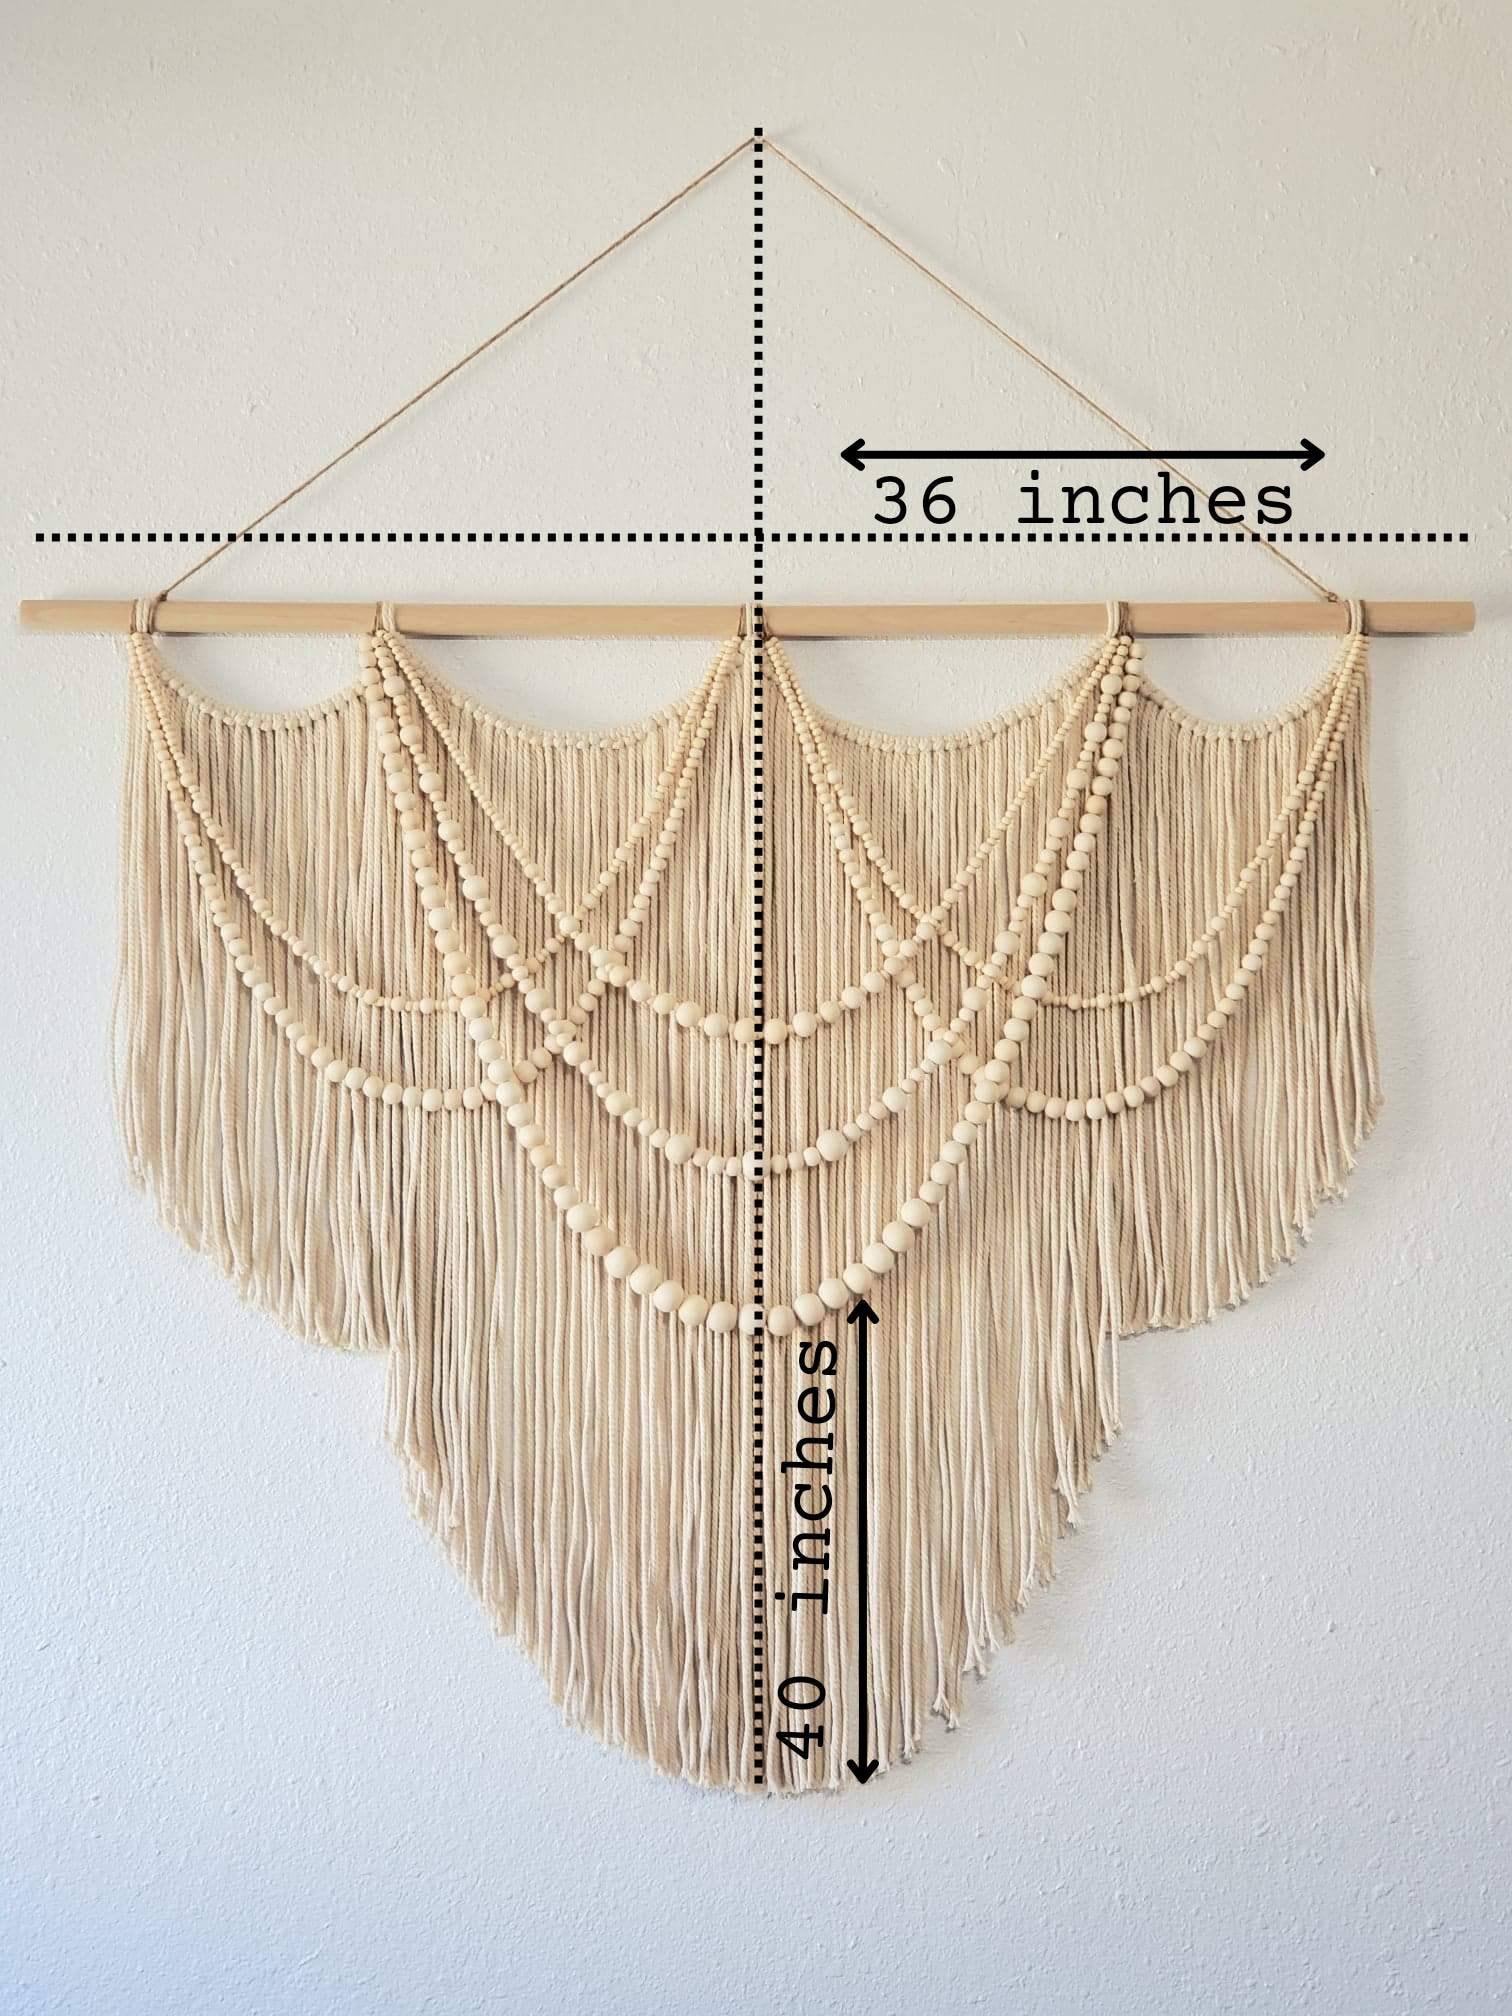 Cara is one of my largest macrame wall hangings. Made on a choke cherry  branch it is 5' 6 wide & 5' 4 long. : r/macrame